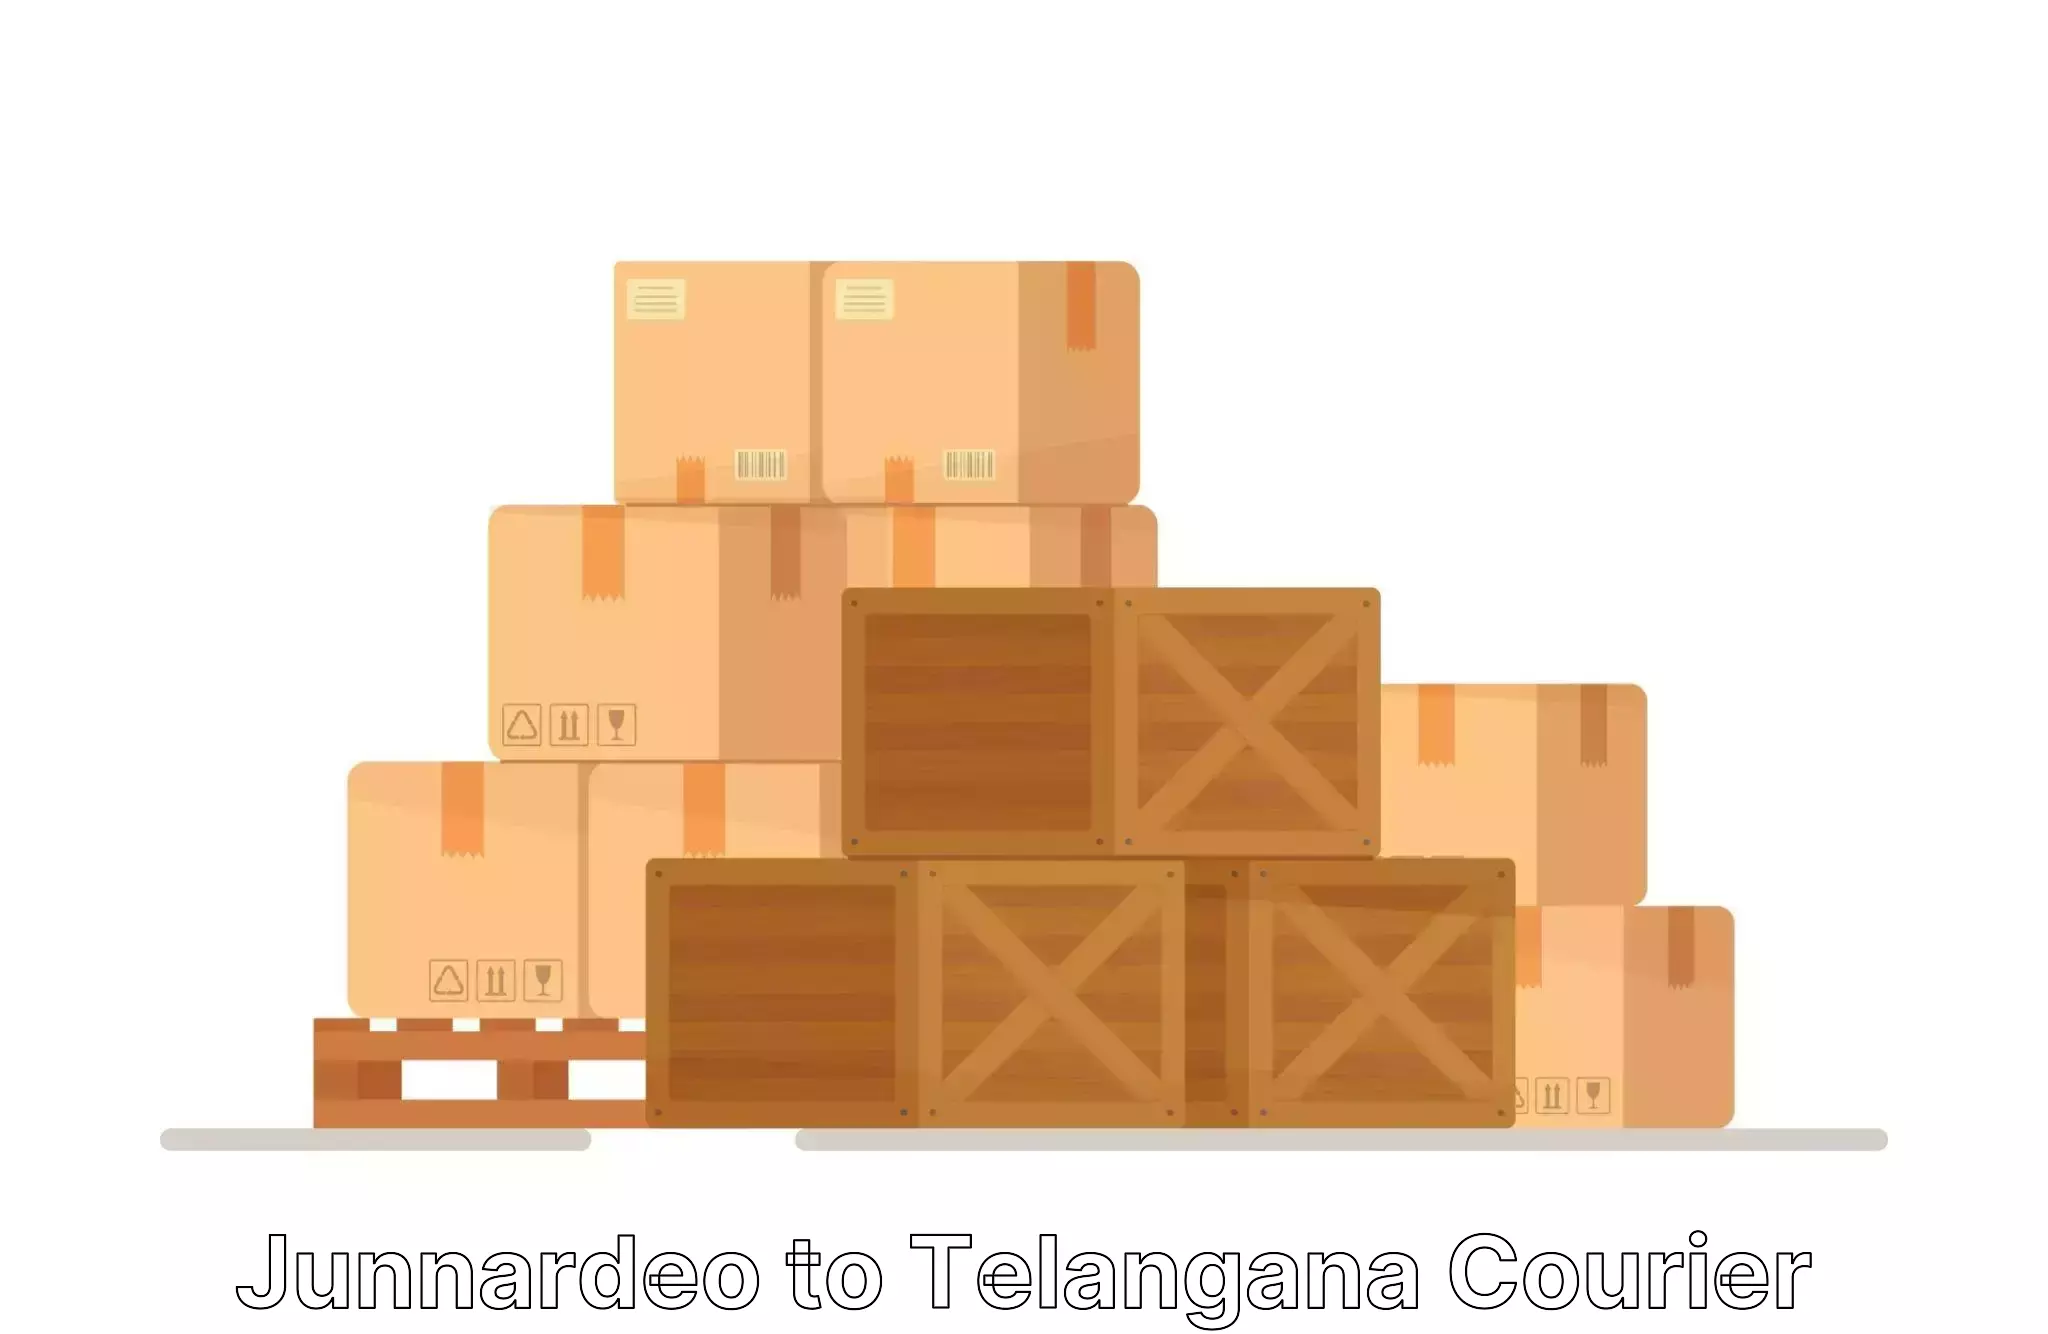 Reliable relocation services Junnardeo to Gollapalli